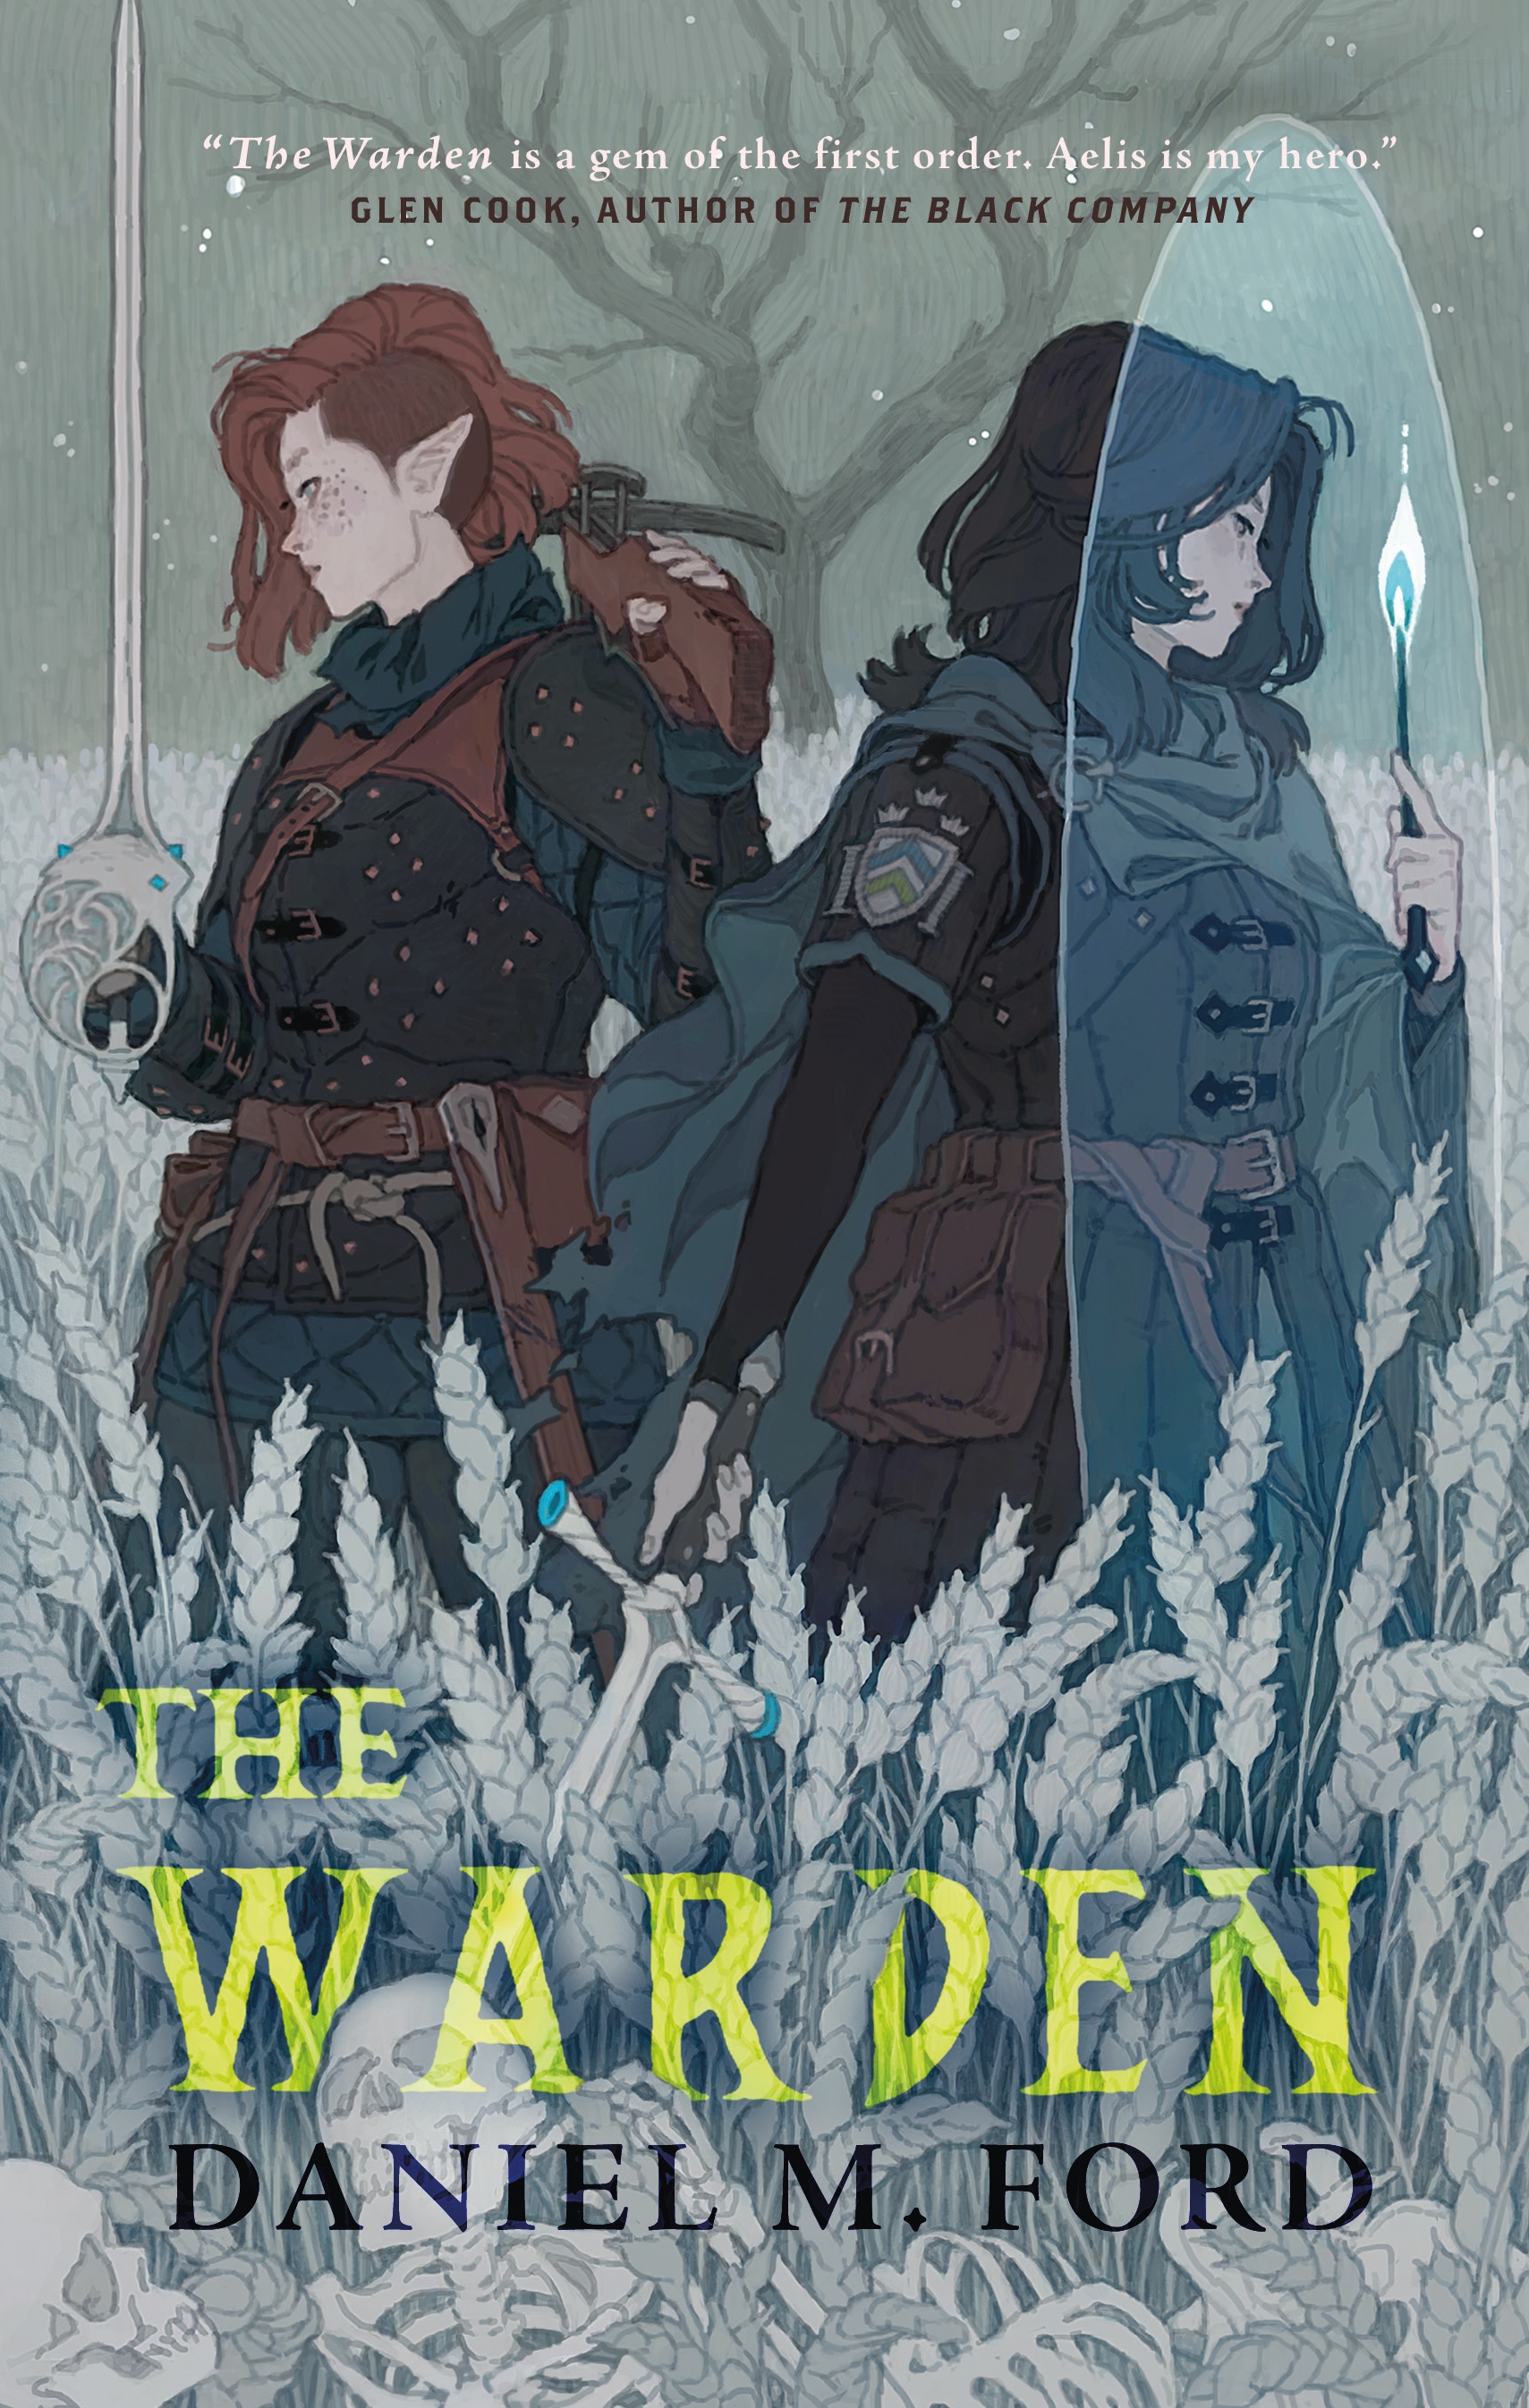 The Warden : A Novel by Daniel M. Ford